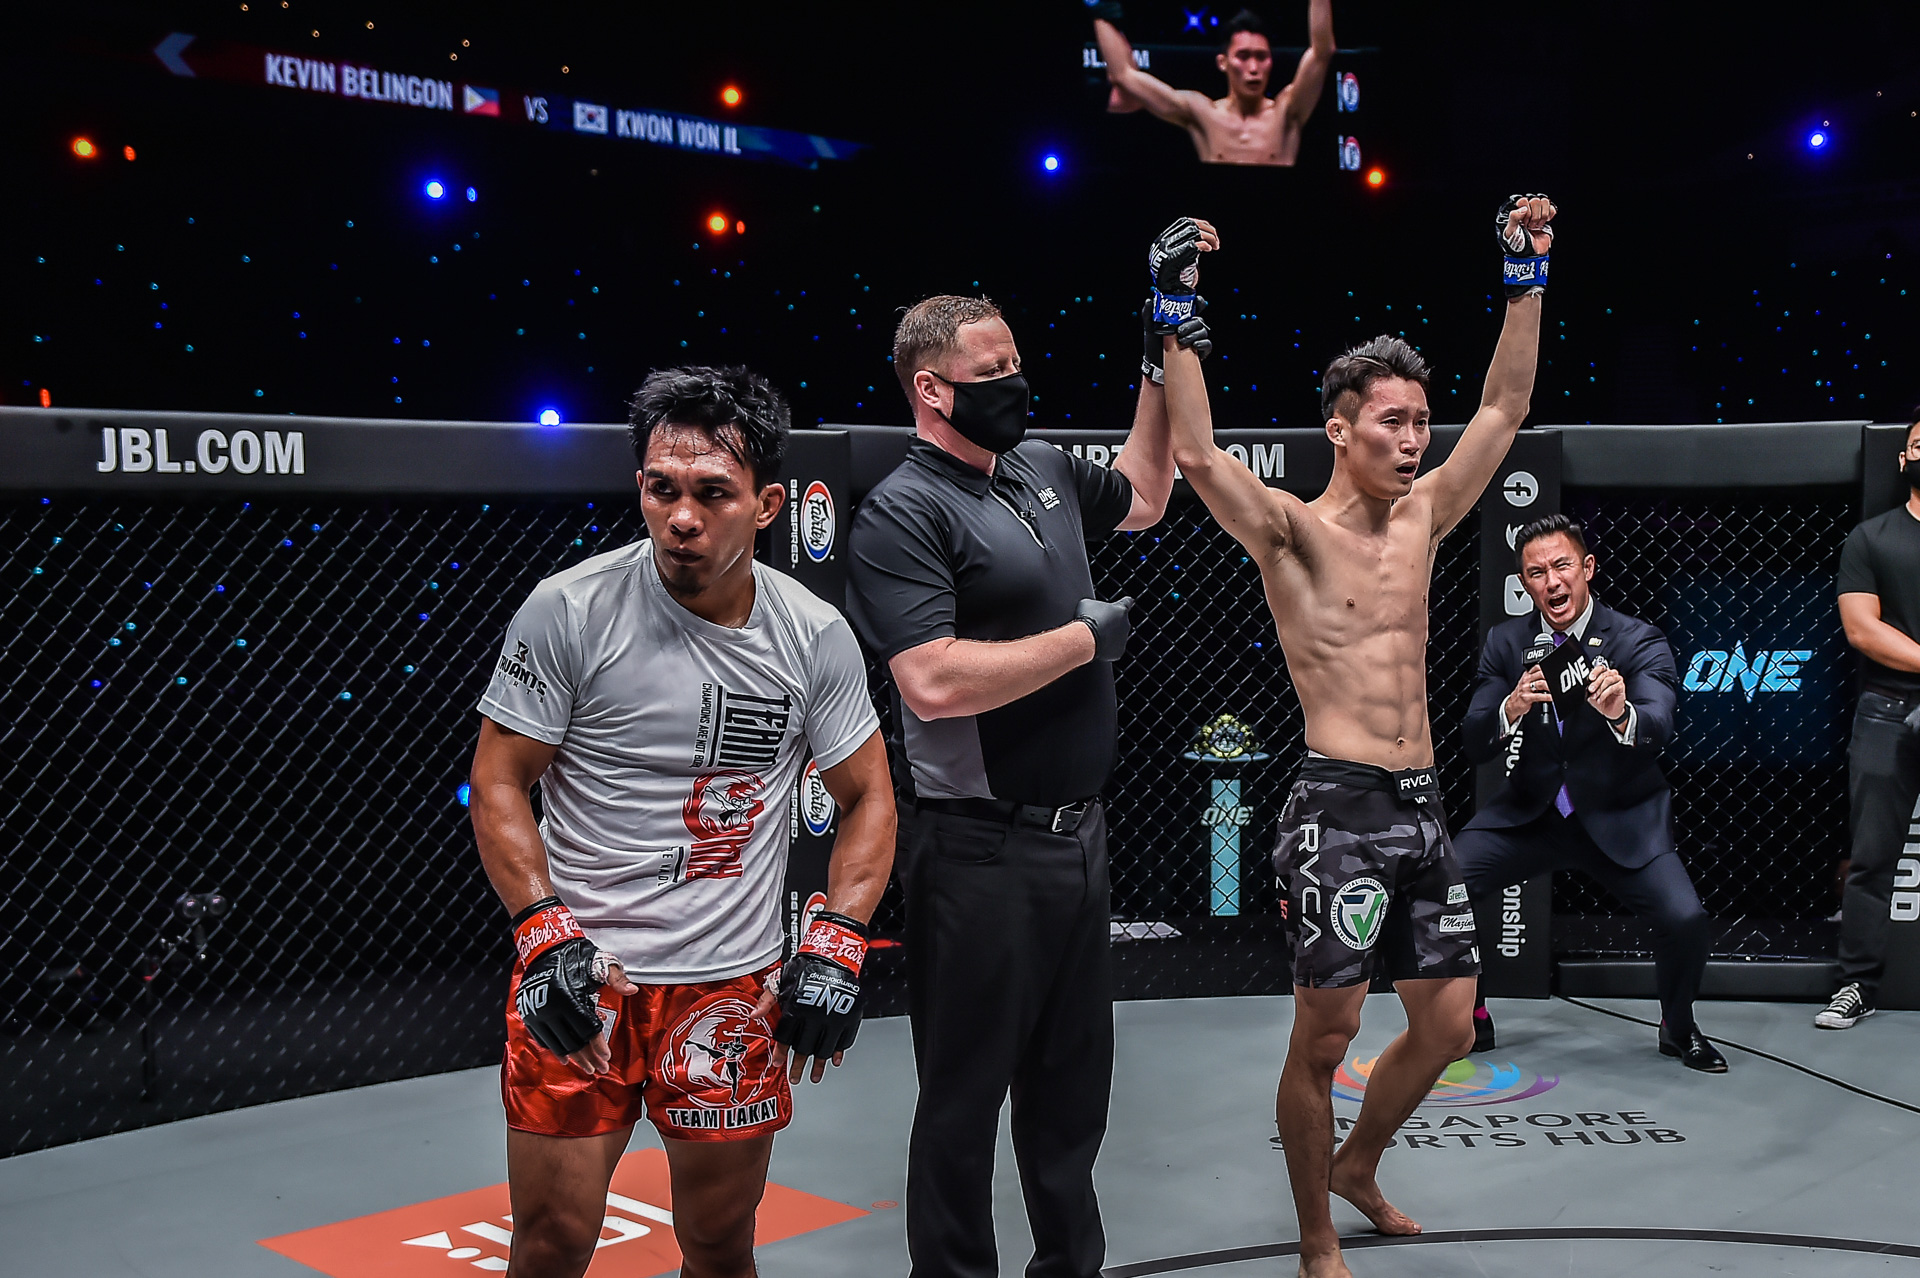 ONE-Winter-Warrior-Kwon-Won-Il-def-Kevin-Belingon-2 Three challengers for new ONE champ John Lineker Mixed Martial Arts News ONE Championship  - philippine sports news